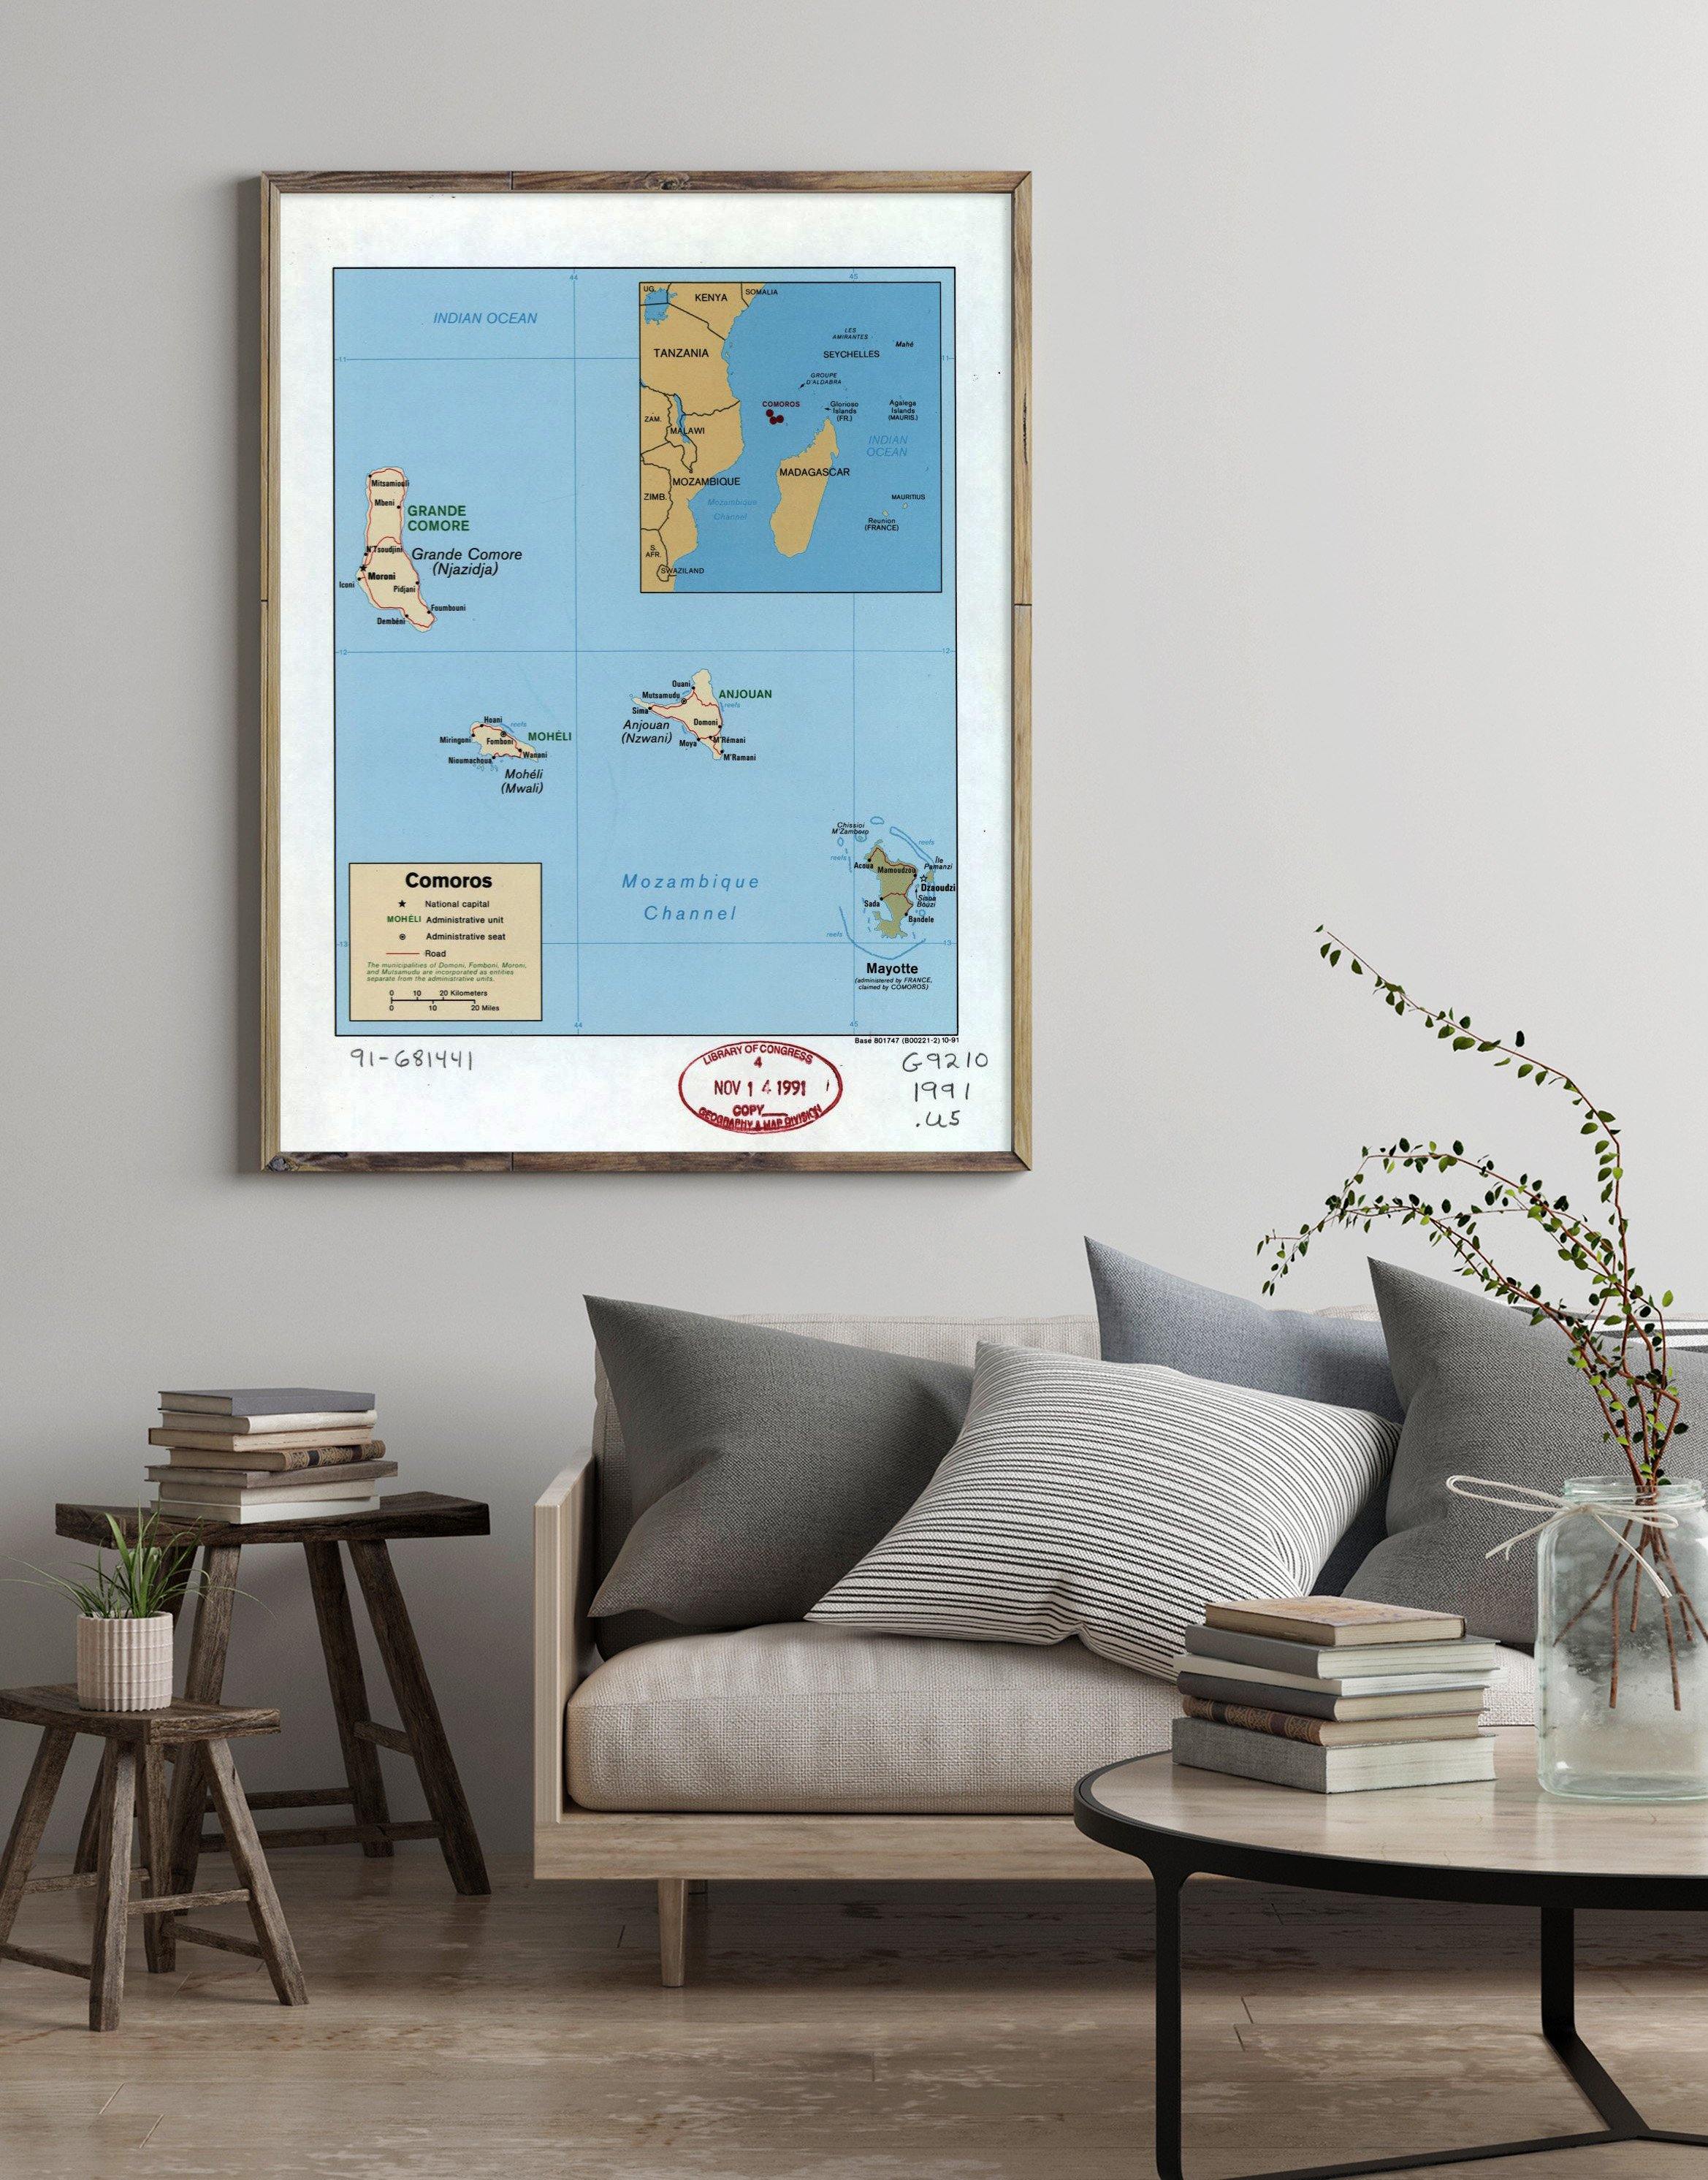 1991 Map| Comoros| Comoros Map Size: 18 inches x 24 inches |Fits 18x24 - New York Map Company